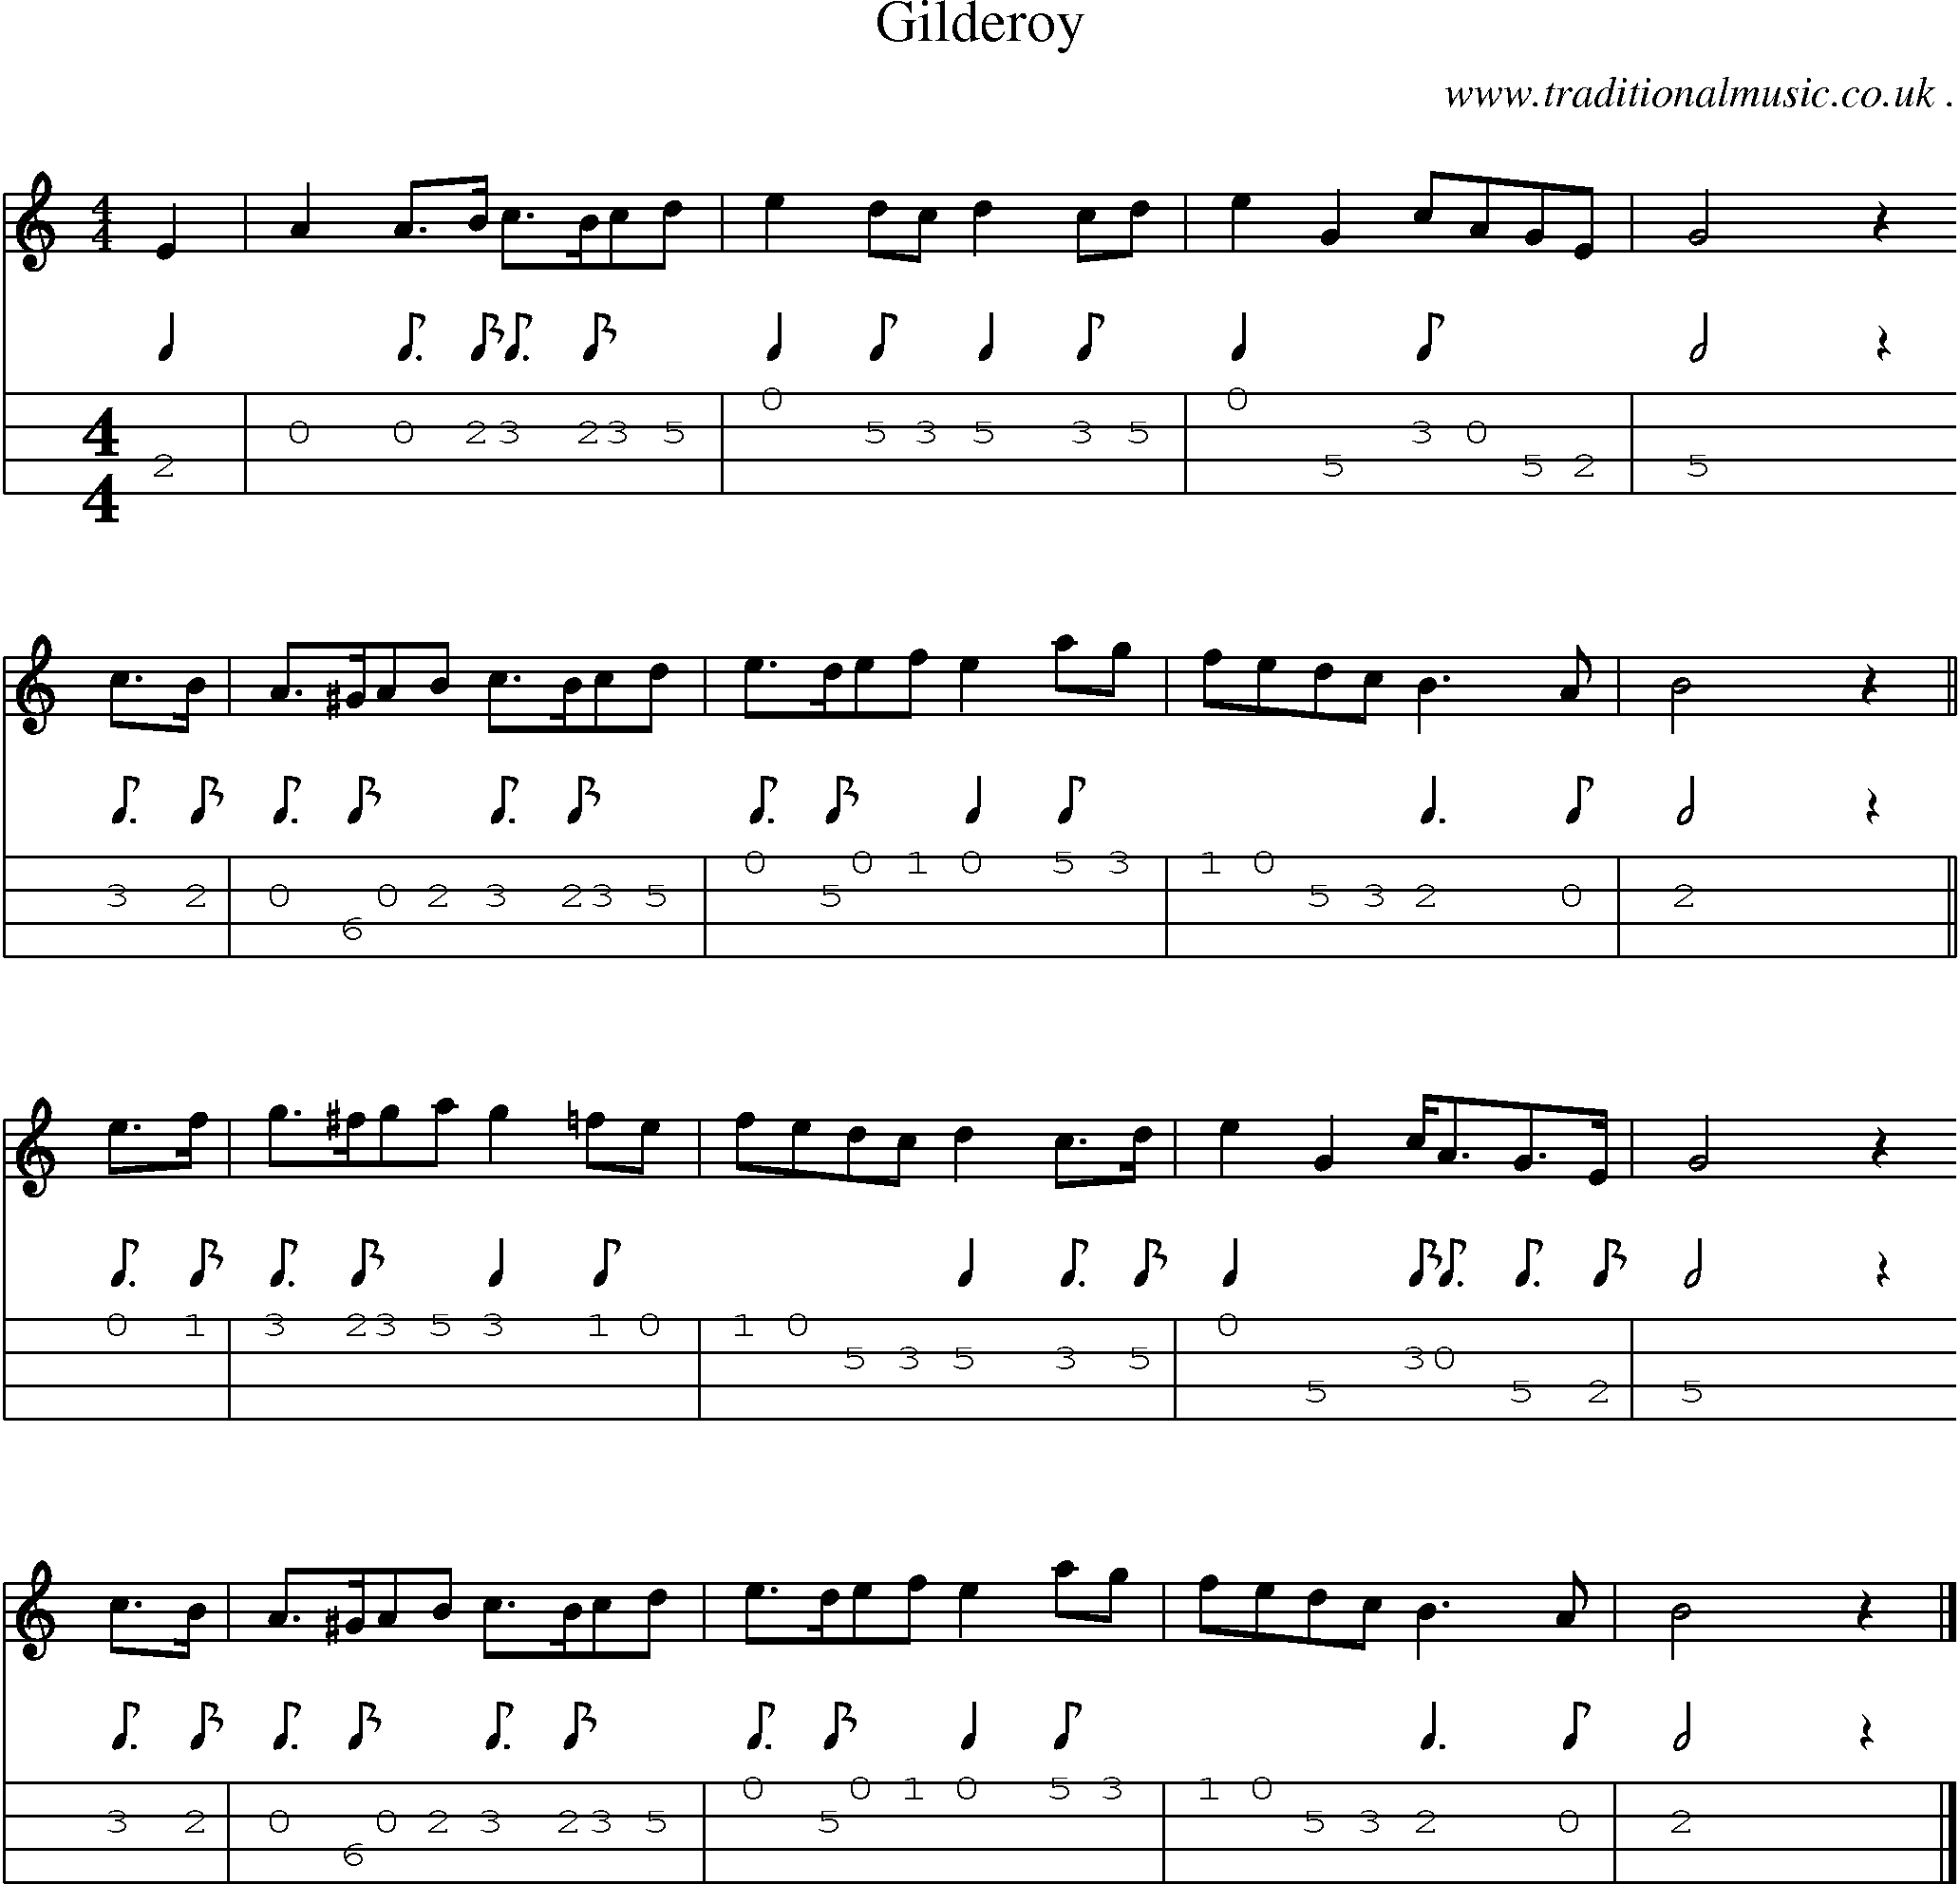 Sheet-music  score, Chords and Mandolin Tabs for Gilderoy